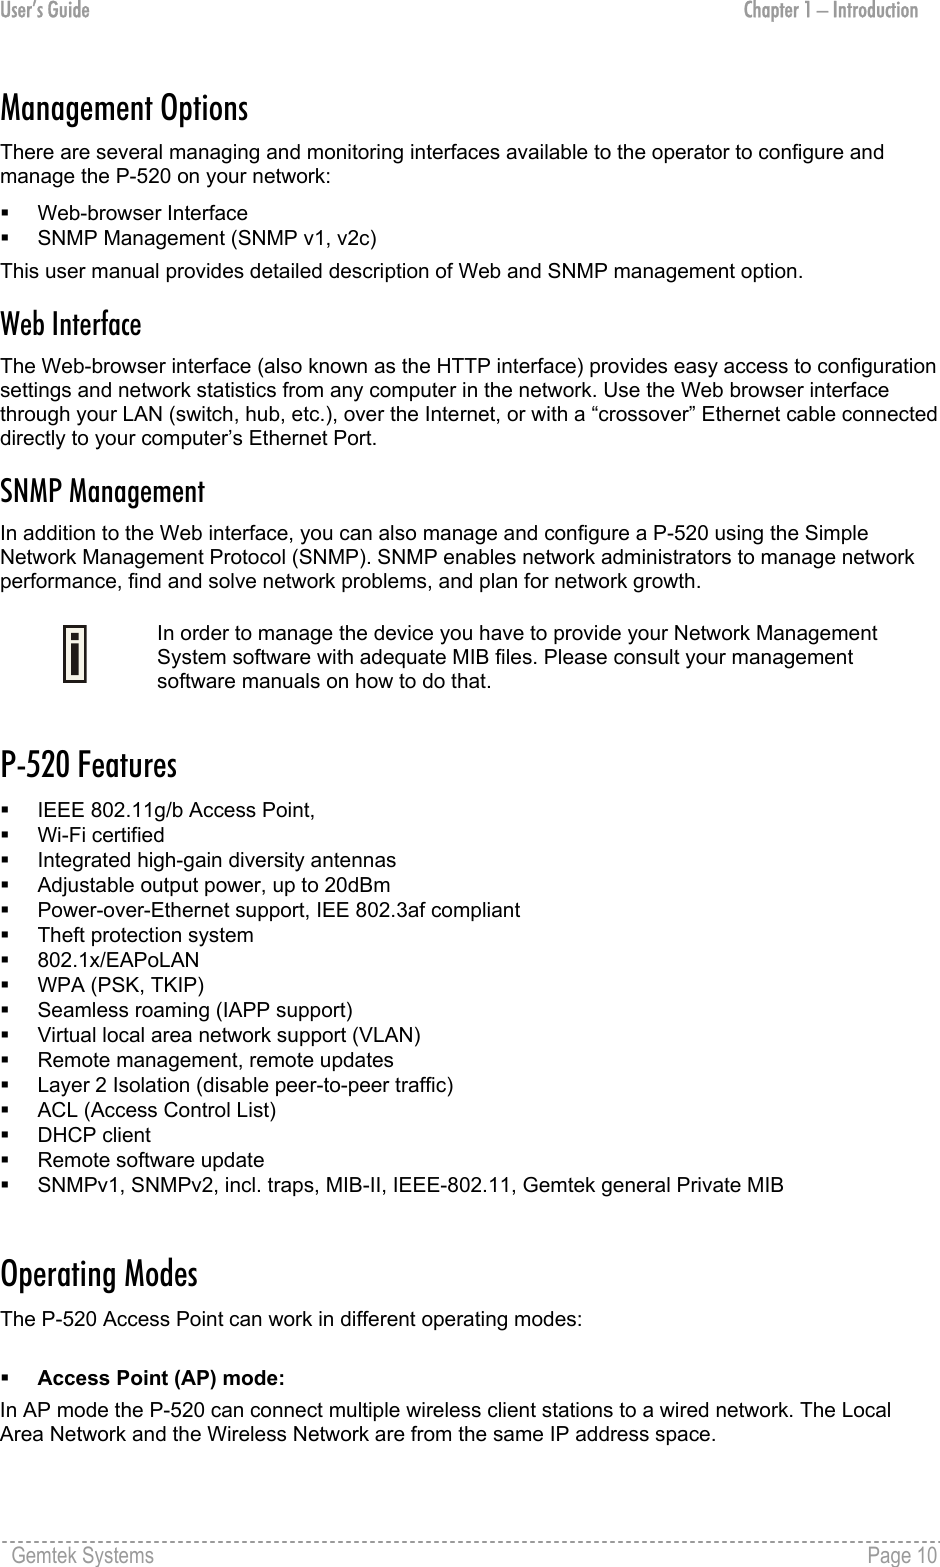 User’s Guide  Chapter 1 – Introduction Management Options There are several managing and monitoring interfaces available to the operator to configure and manage the P-520 on your network:   Web-browser Interface   SNMP Management (SNMP v1, v2c)  This user manual provides detailed description of Web and SNMP management option. Web Interface The Web-browser interface (also known as the HTTP interface) provides easy access to configuration settings and network statistics from any computer in the network. Use the Web browser interface through your LAN (switch, hub, etc.), over the Internet, or with a “crossover” Ethernet cable connected directly to your computer’s Ethernet Port. SNMP Management In addition to the Web interface, you can also manage and configure a P-520 using the Simple Network Management Protocol (SNMP). SNMP enables network administrators to manage network performance, find and solve network problems, and plan for network growth.   In order to manage the device you have to provide your Network Management System software with adequate MIB files. Please consult your management software manuals on how to do that.  P-520 Features   IEEE 802.11g/b Access Point,    Wi-Fi certified   Integrated high-gain diversity antennas   Adjustable output power, up to 20dBm   Power-over-Ethernet support, IEE 802.3af compliant   Theft protection system   802.1x/EAPoLAN   WPA (PSK, TKIP)   Seamless roaming (IAPP support)   Virtual local area network support (VLAN)   Remote management, remote updates   Layer 2 Isolation (disable peer-to-peer traffic)   ACL (Access Control List)    DHCP client   Remote software update   SNMPv1, SNMPv2, incl. traps, MIB-II, IEEE-802.11, Gemtek general Private MIB  Operating Modes The P-520 Access Point can work in different operating modes:    Access Point (AP) mode: In AP mode the P-520 can connect multiple wireless client stations to a wired network. The Local Area Network and the Wireless Network are from the same IP address space.  Gemtek Systems    Page 10  